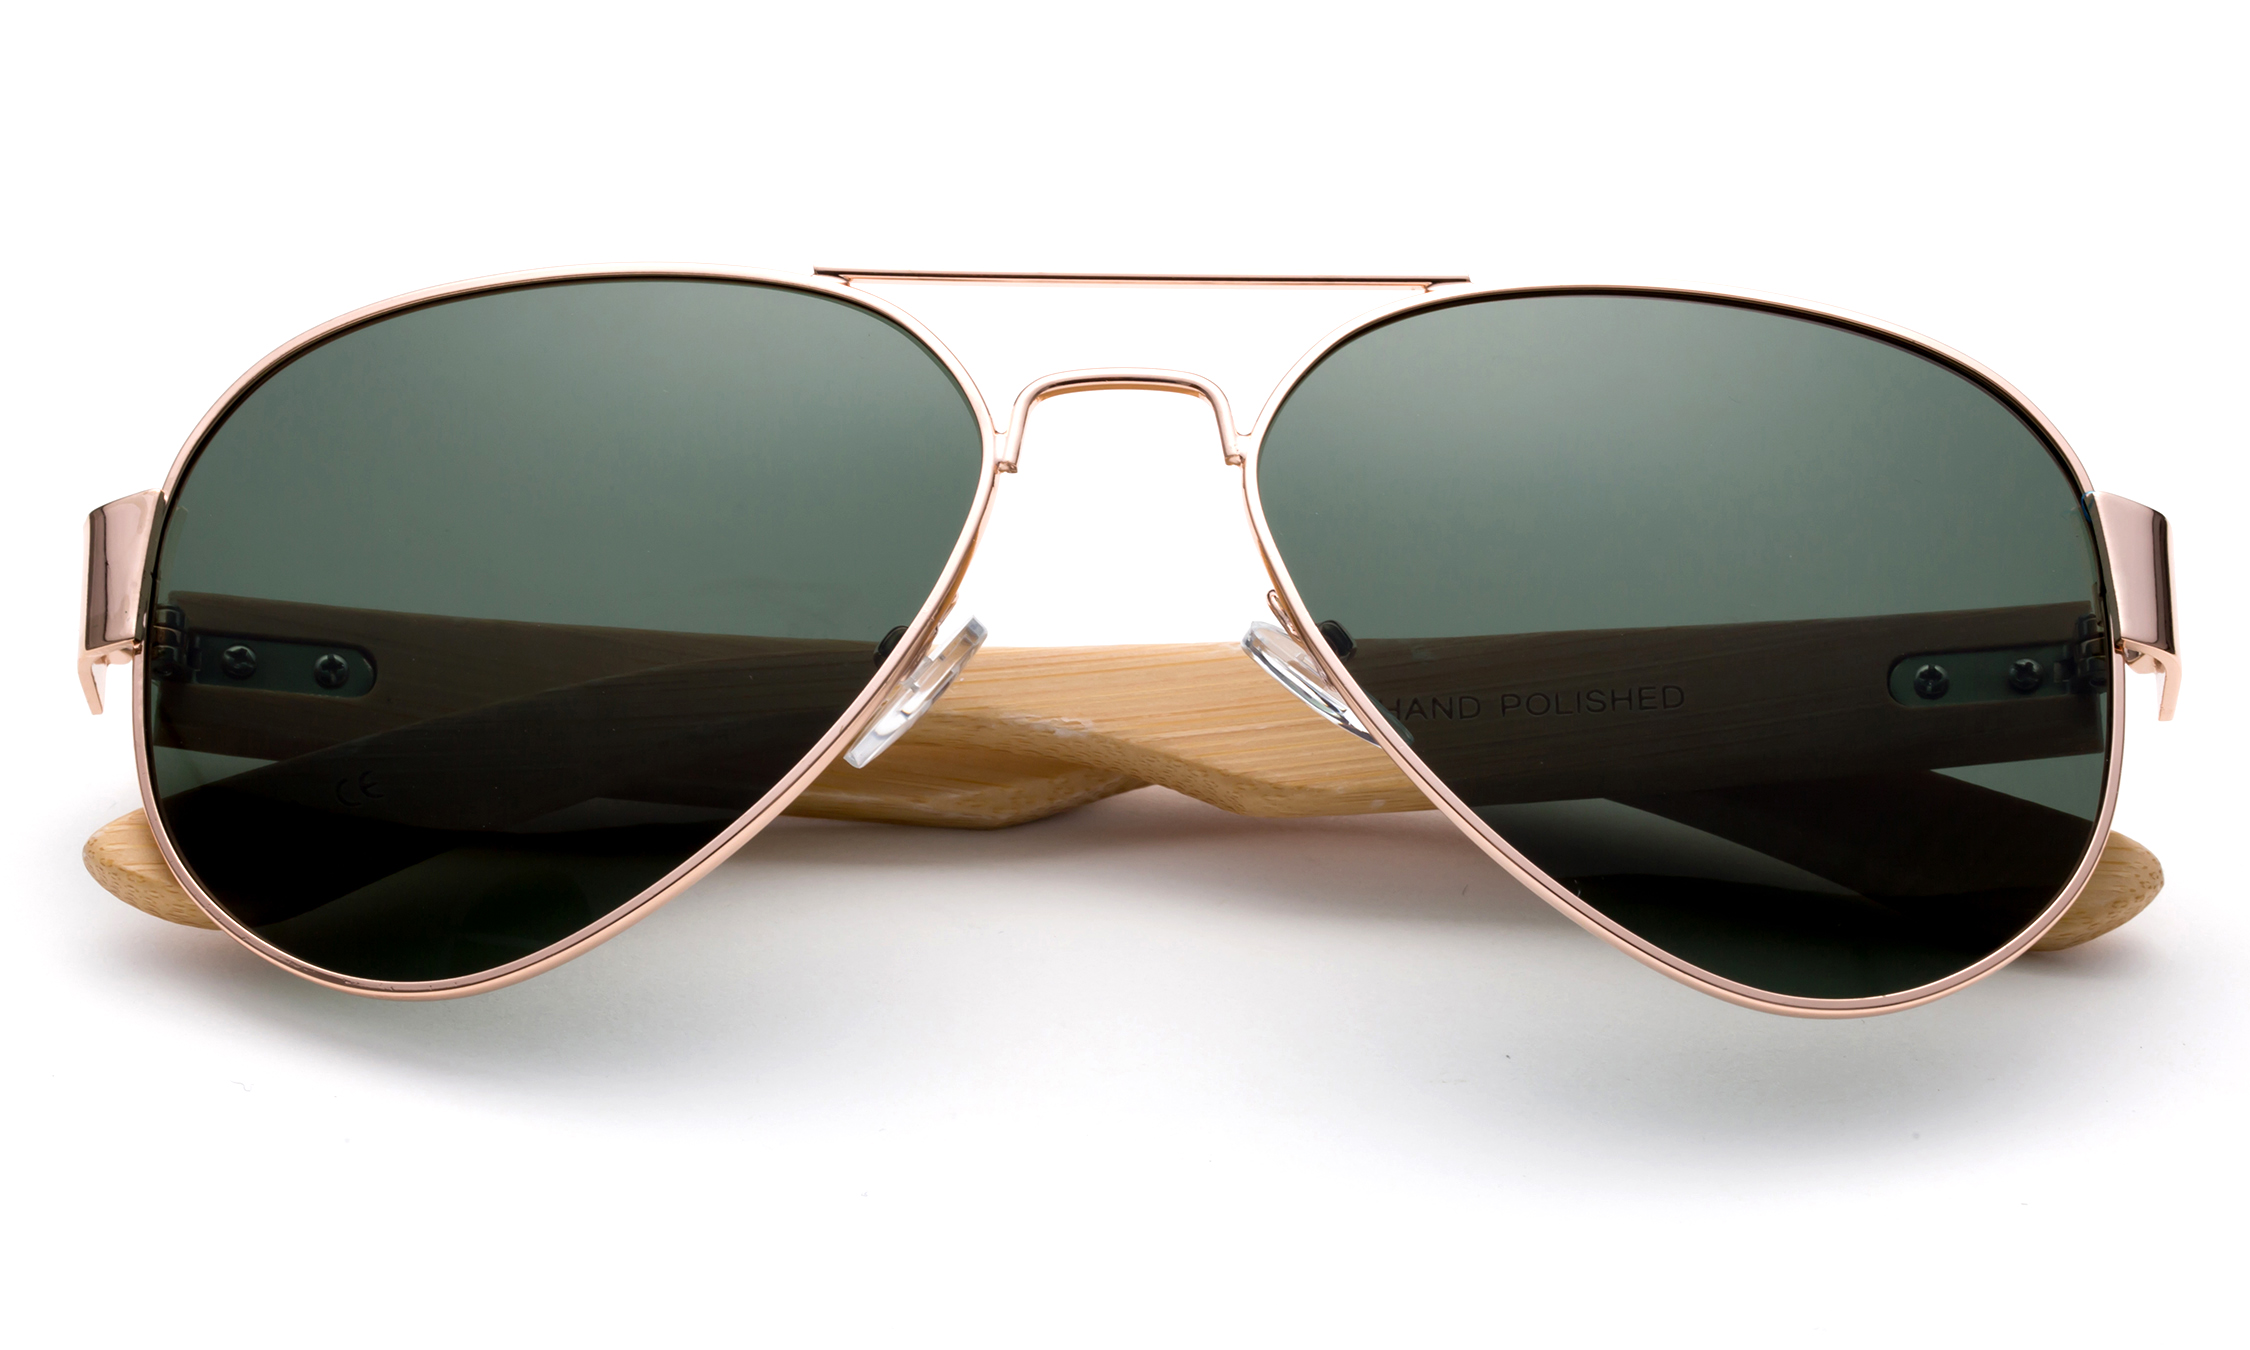 High Qaulity Polarized Sunglasses with Real Bamboo Arm Aviator Sunglasses Bamboo Sunglasses for Men & Women - image 1 of 2